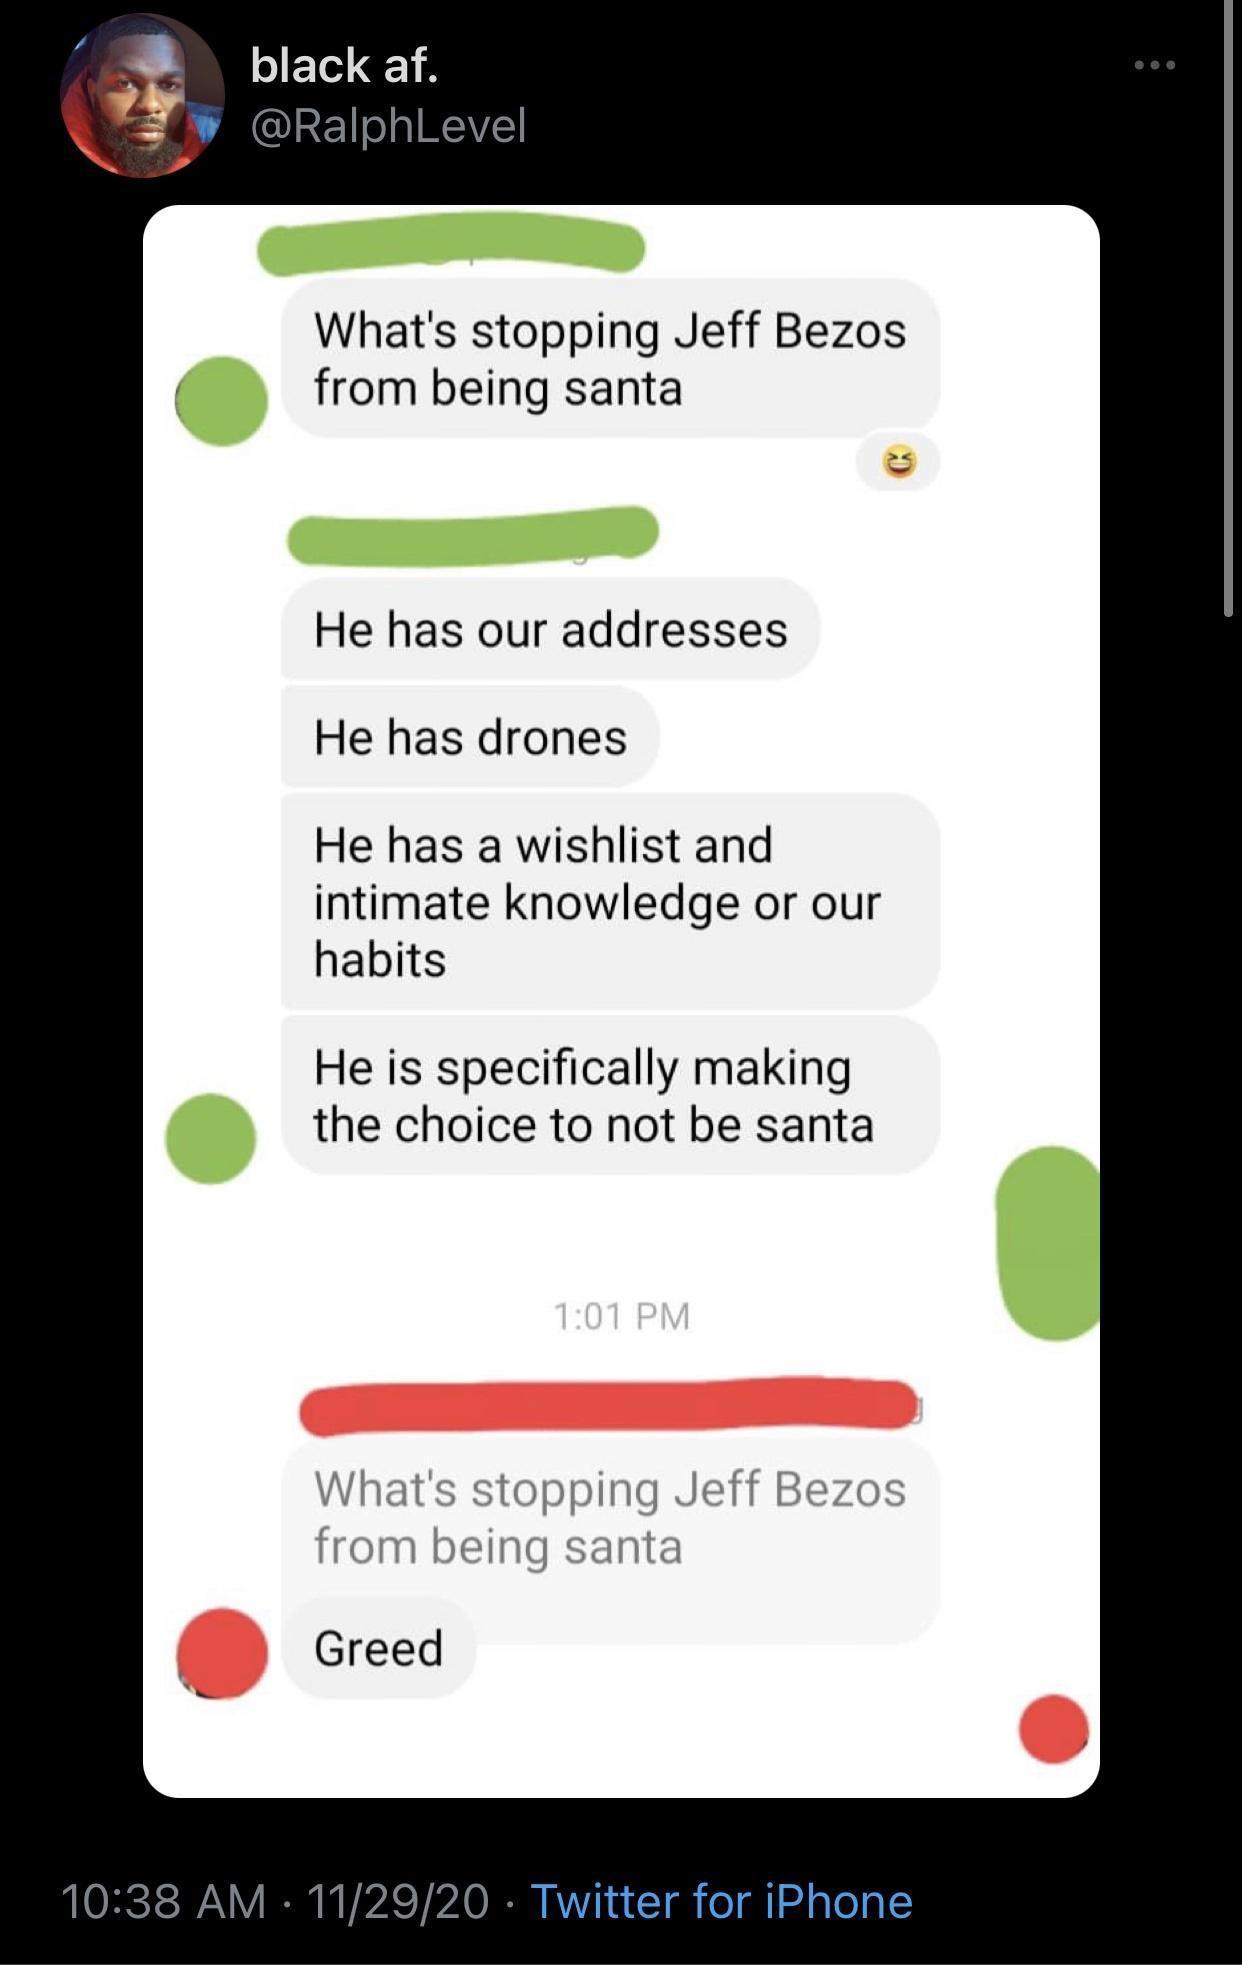 software - black af. What's stopping Jeff Bezos from being santa He has our addresses He has drones He has a wishlist and intimate knowledge or our habits He is specifically making the choice to not be santa What's stopping Jeff Bezos from being santa Gre